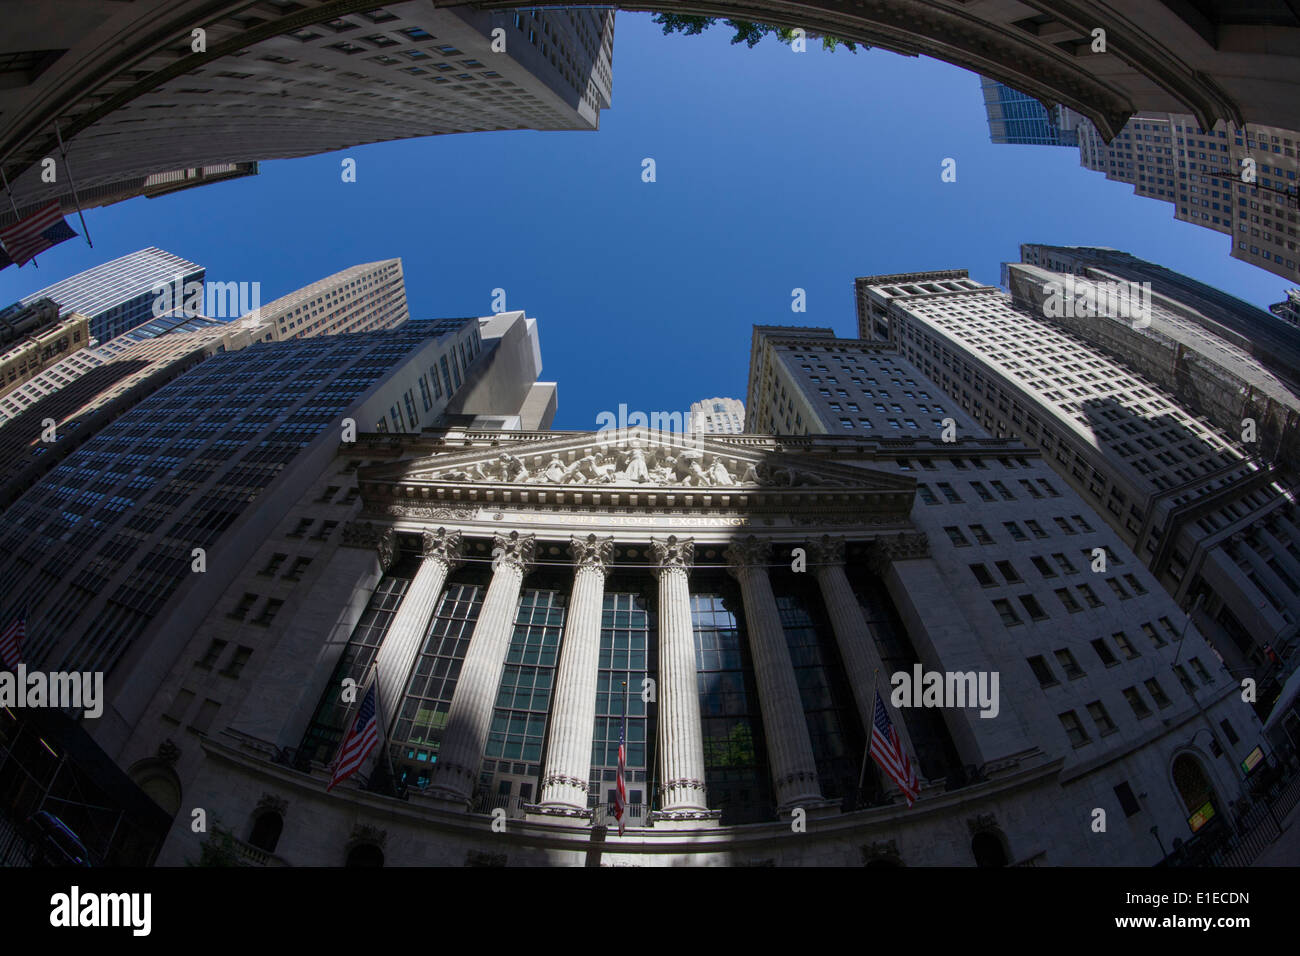 Distorted fish-eye lens view of classical pillars and American flag hanging in front of the New York Stock Exchange (NYSE) on Wall Street, Lower Manhattan. Stock Photo